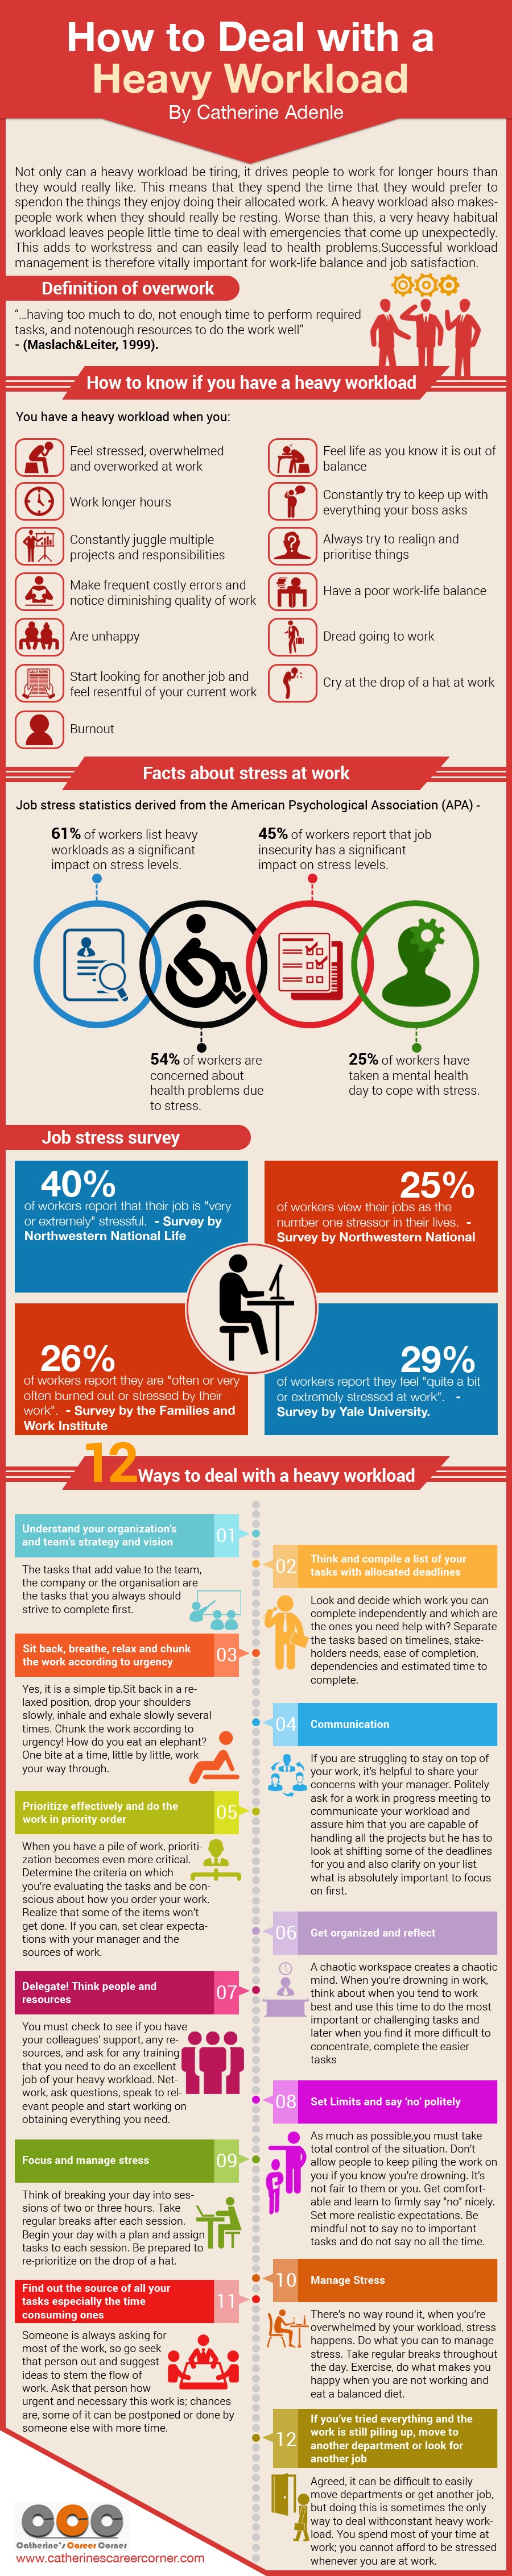 How to Deal with a Heavy Workload (Infographic)